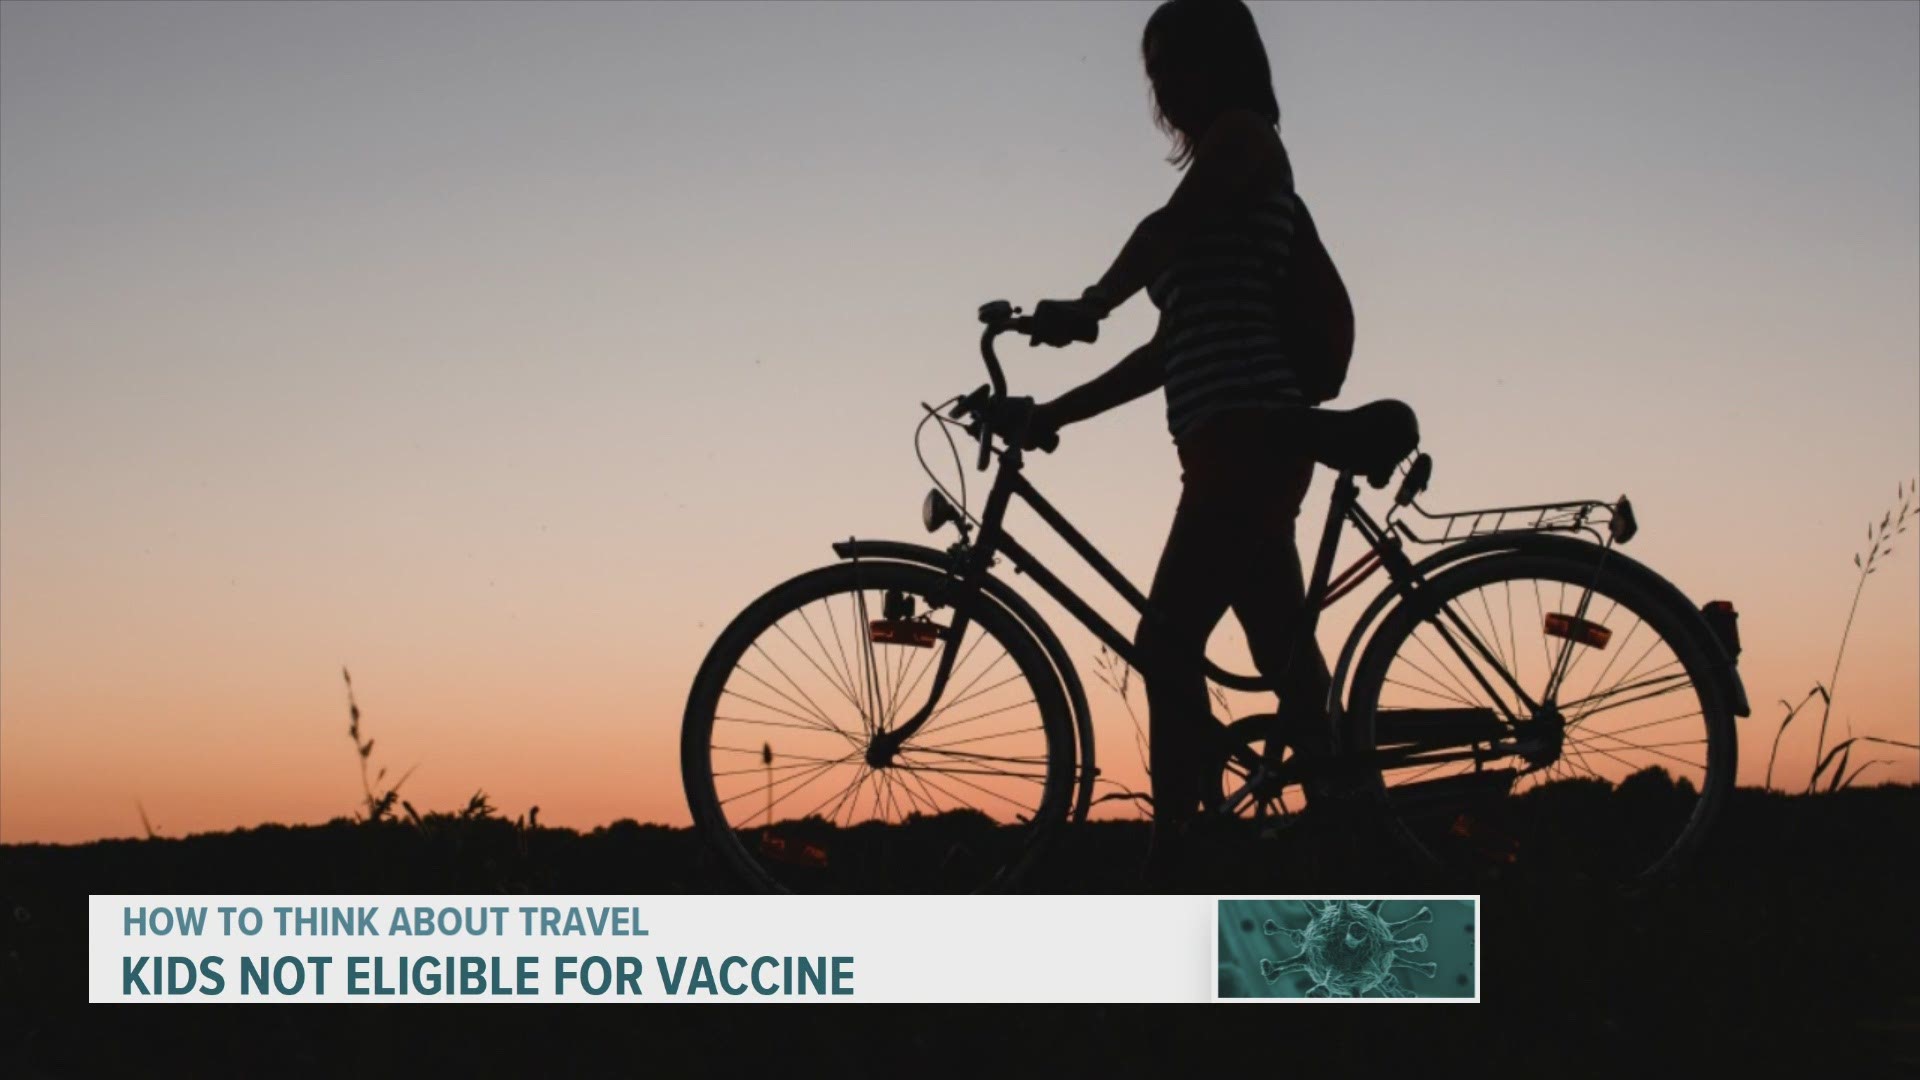 Since kids aren't able to get any of the three approved COVID-19 vaccines, they could get sick while traveling this summer.